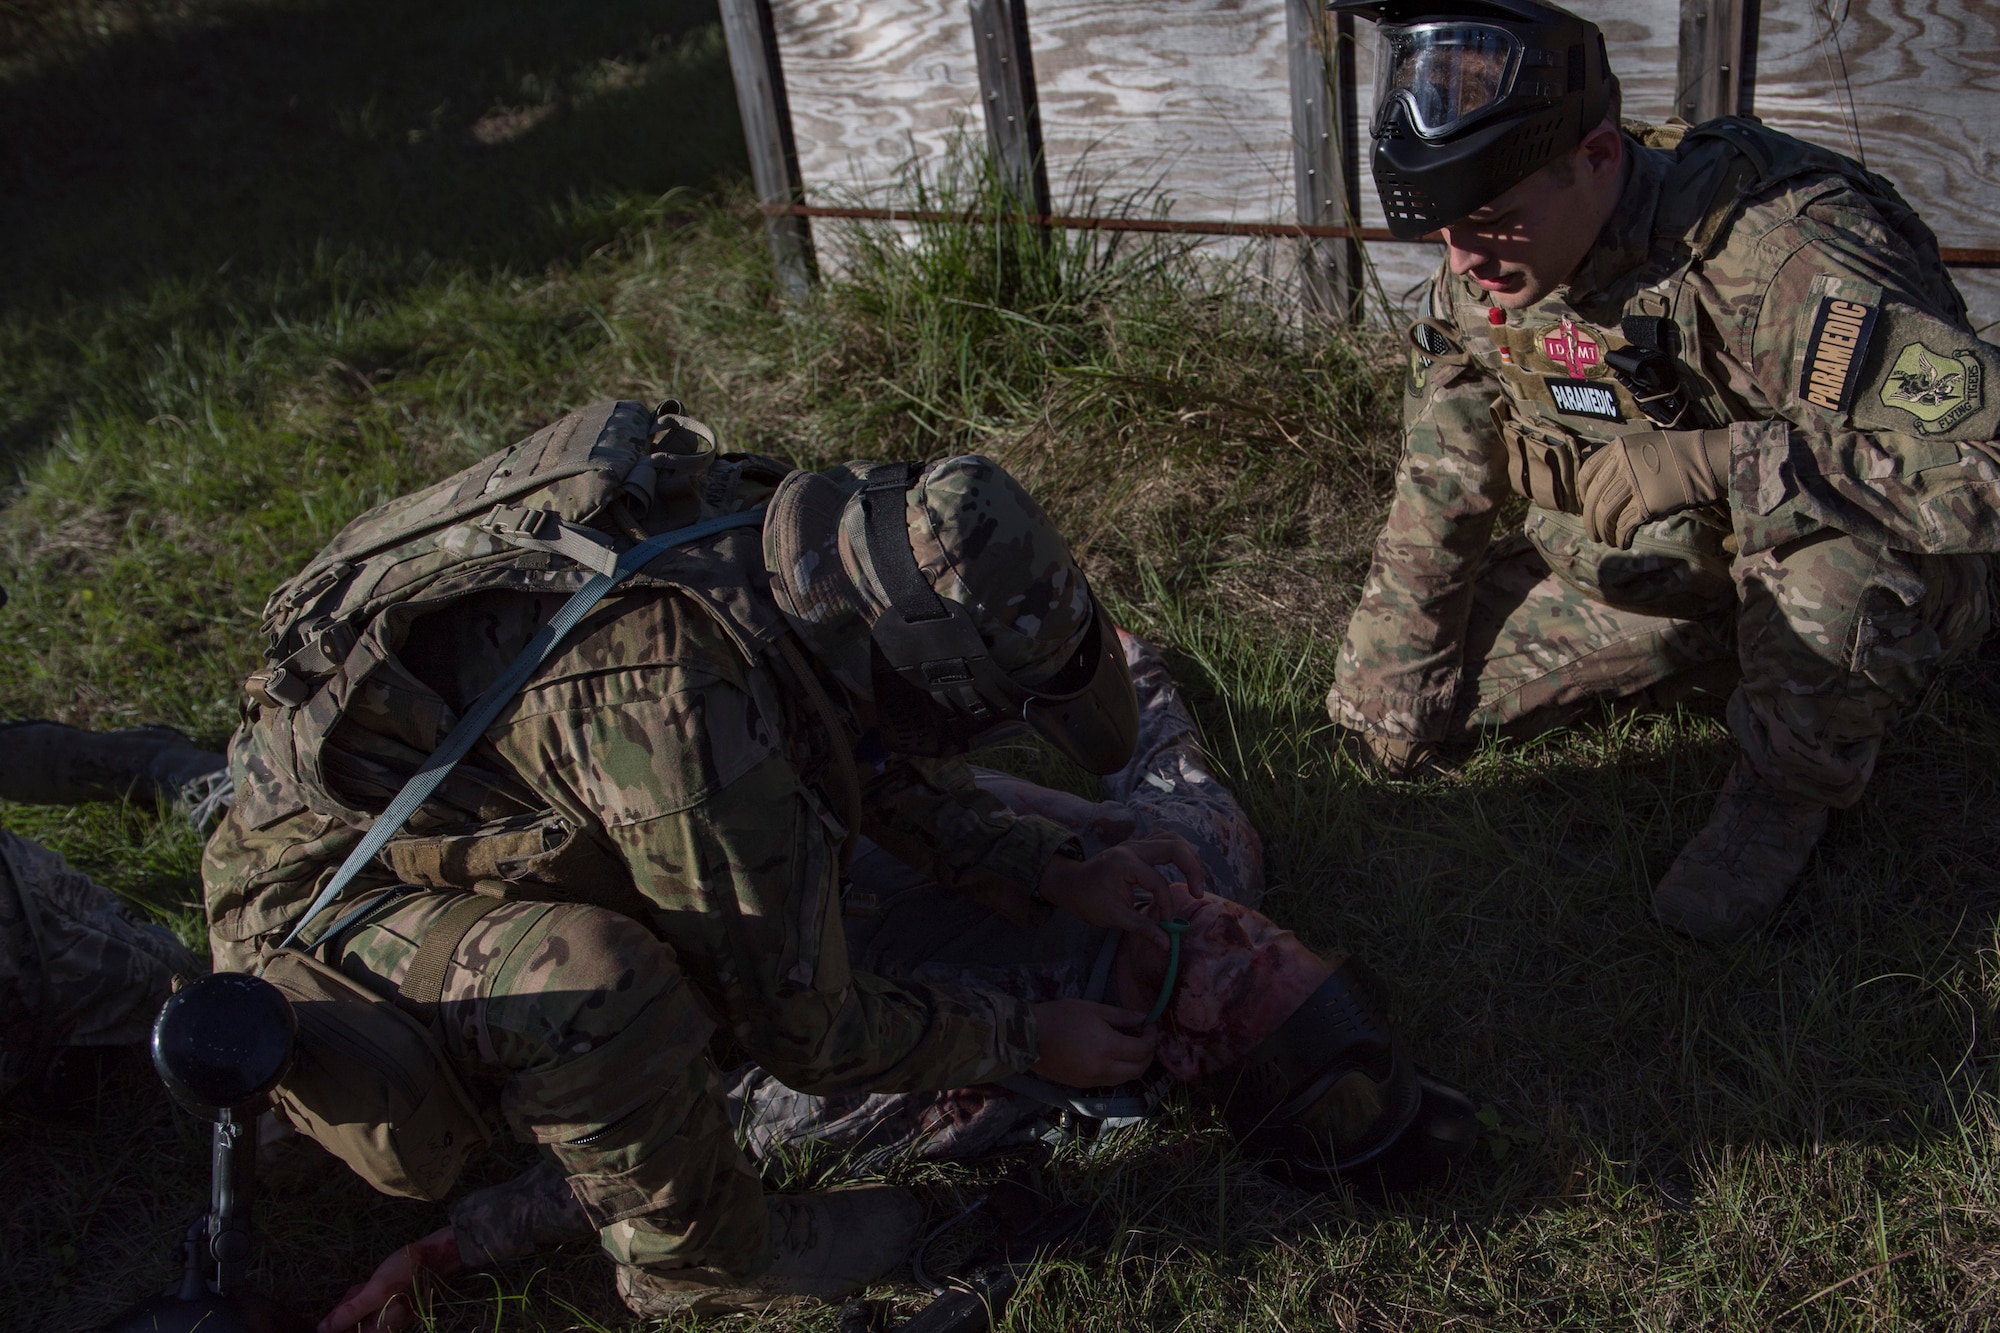 Staff Sgt. Cory Newby, 347th Operations Support Squadron Independent Duty Medical Technician paramedic, observes a student applying Tactical Combat Causality Care during training, Oct. 25, 2017, at Moody Air Force Base, Ga. The new, three-day combined training is designed to merge many smaller courses and seamlessly tie together skills that could be used in the event that Airmen become isolated during a mission. (U.S. Air Force photo by Senior Airman Daniel Snider)